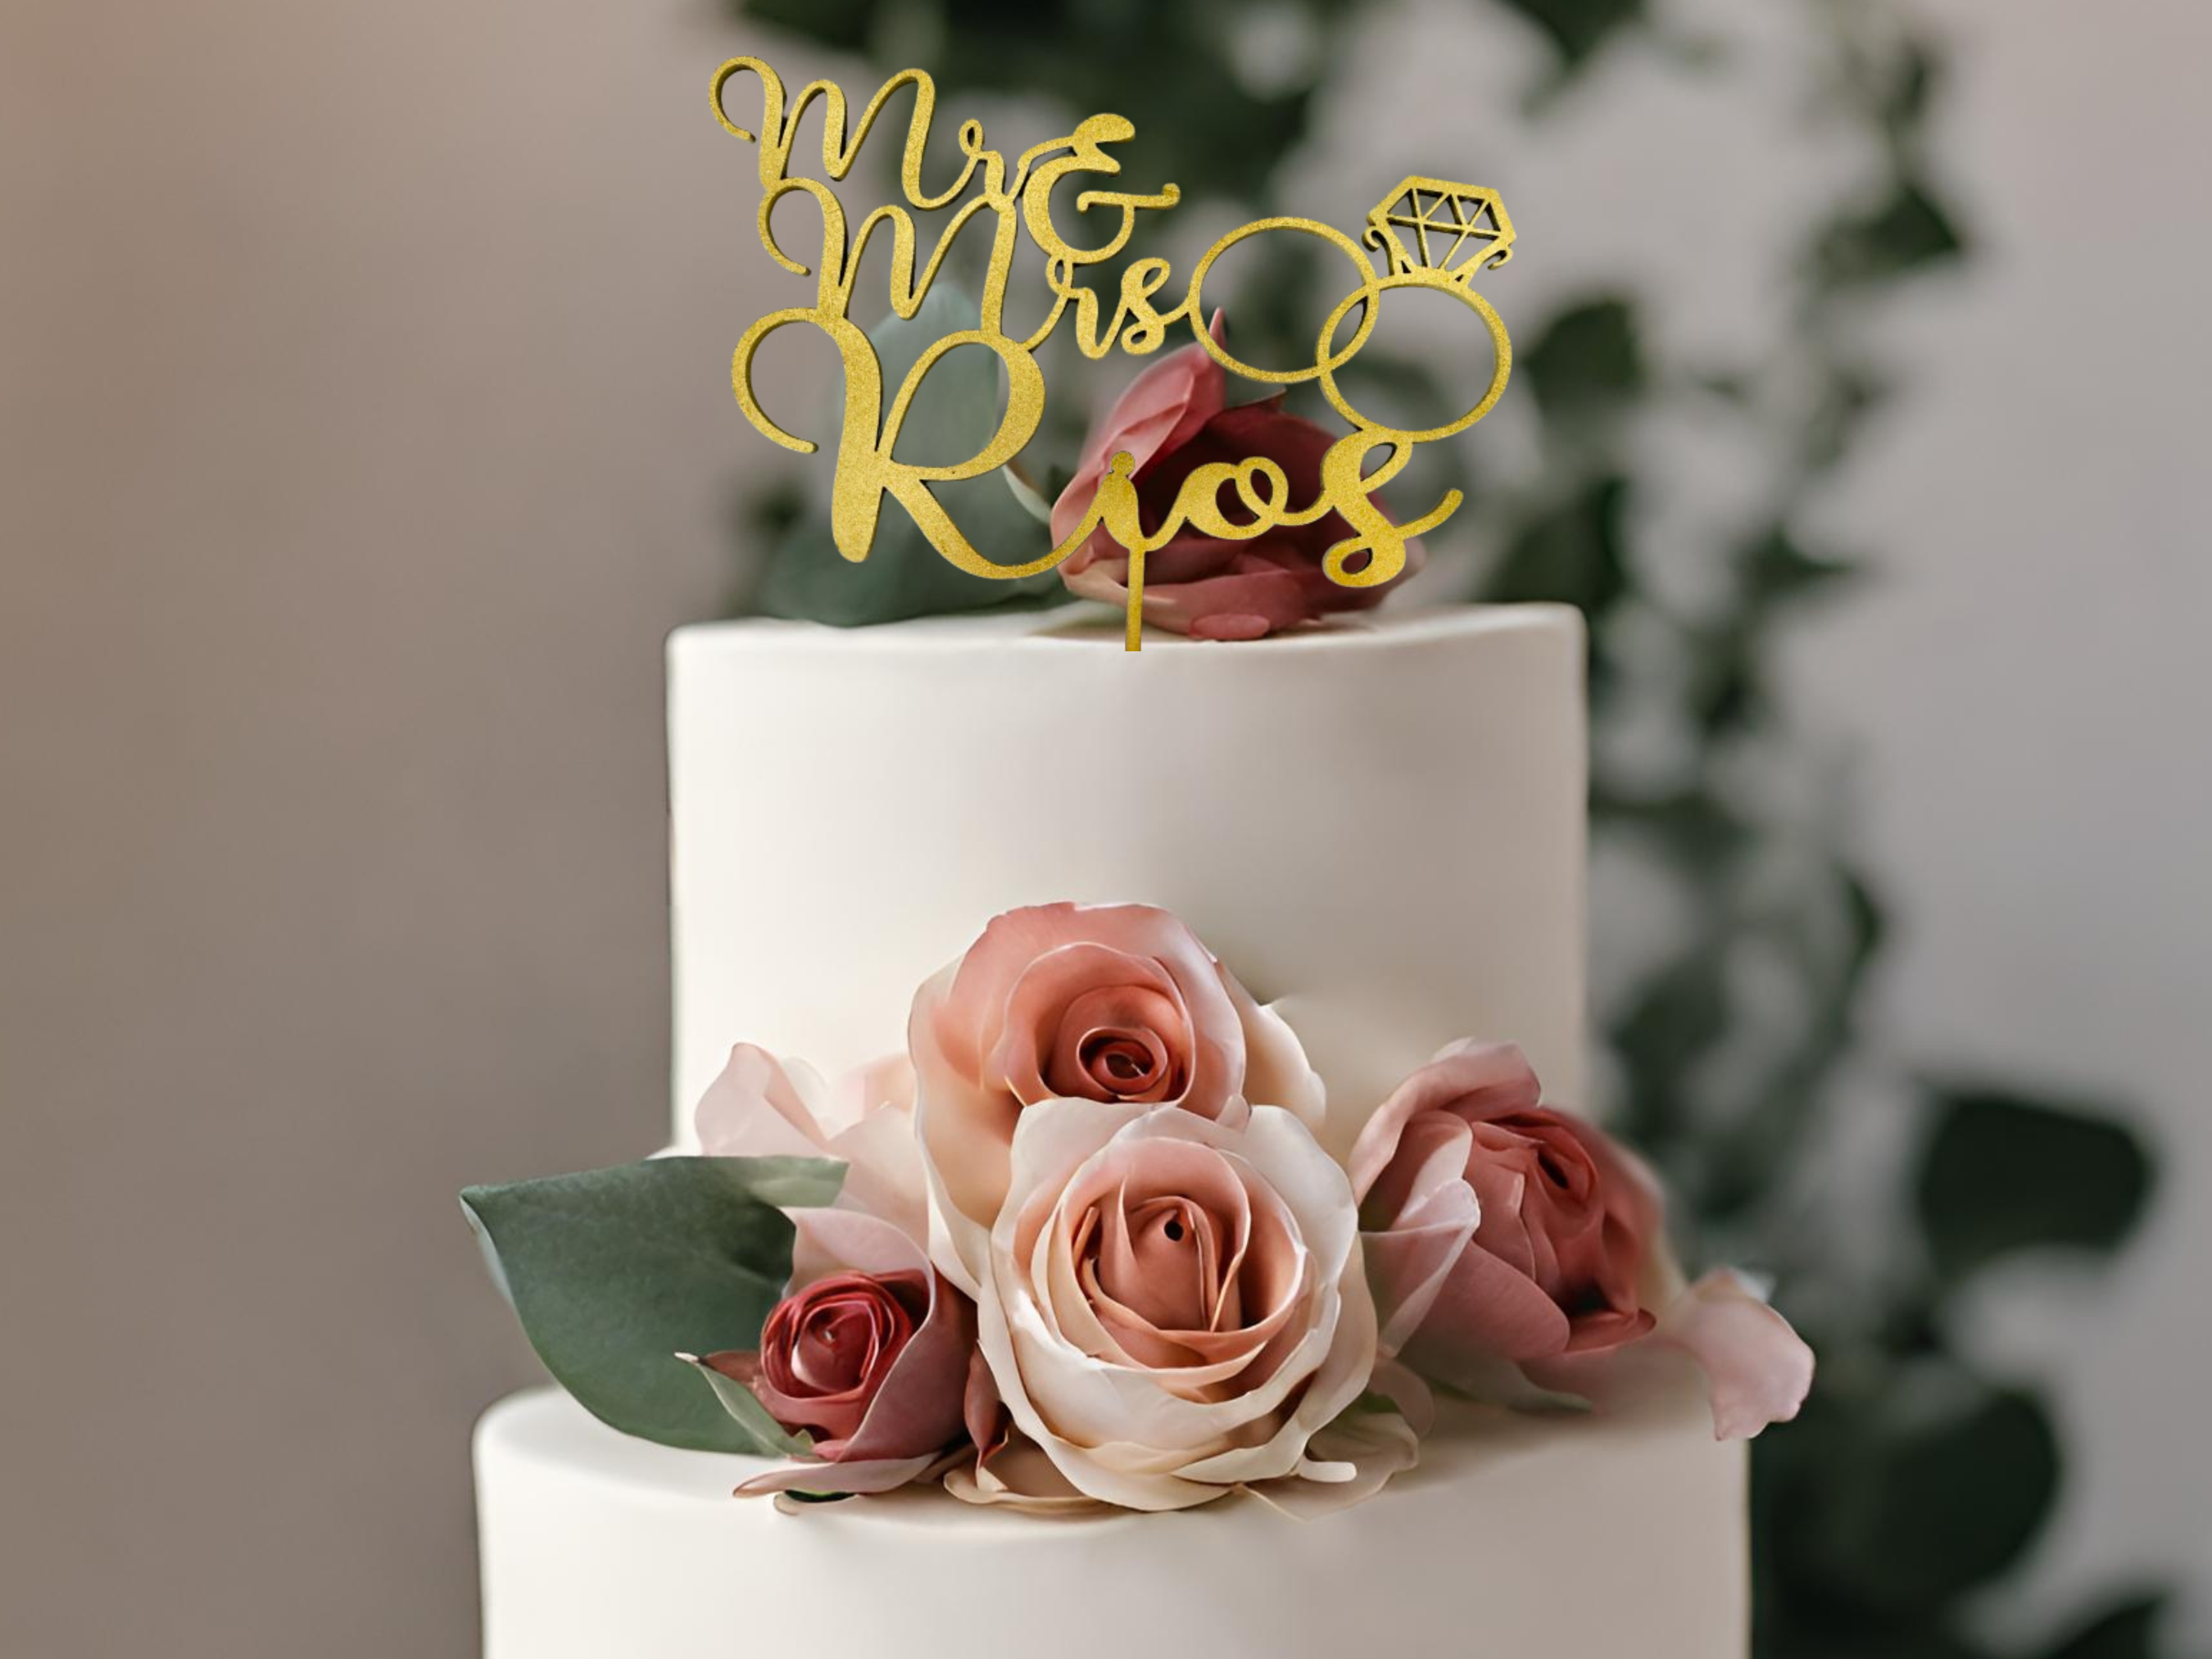 Planning An Engagement Party? Here Are 14 Cake Ideas For The Couple With A  Sweet Tooth | Wedding Vendors | Wedding Blog